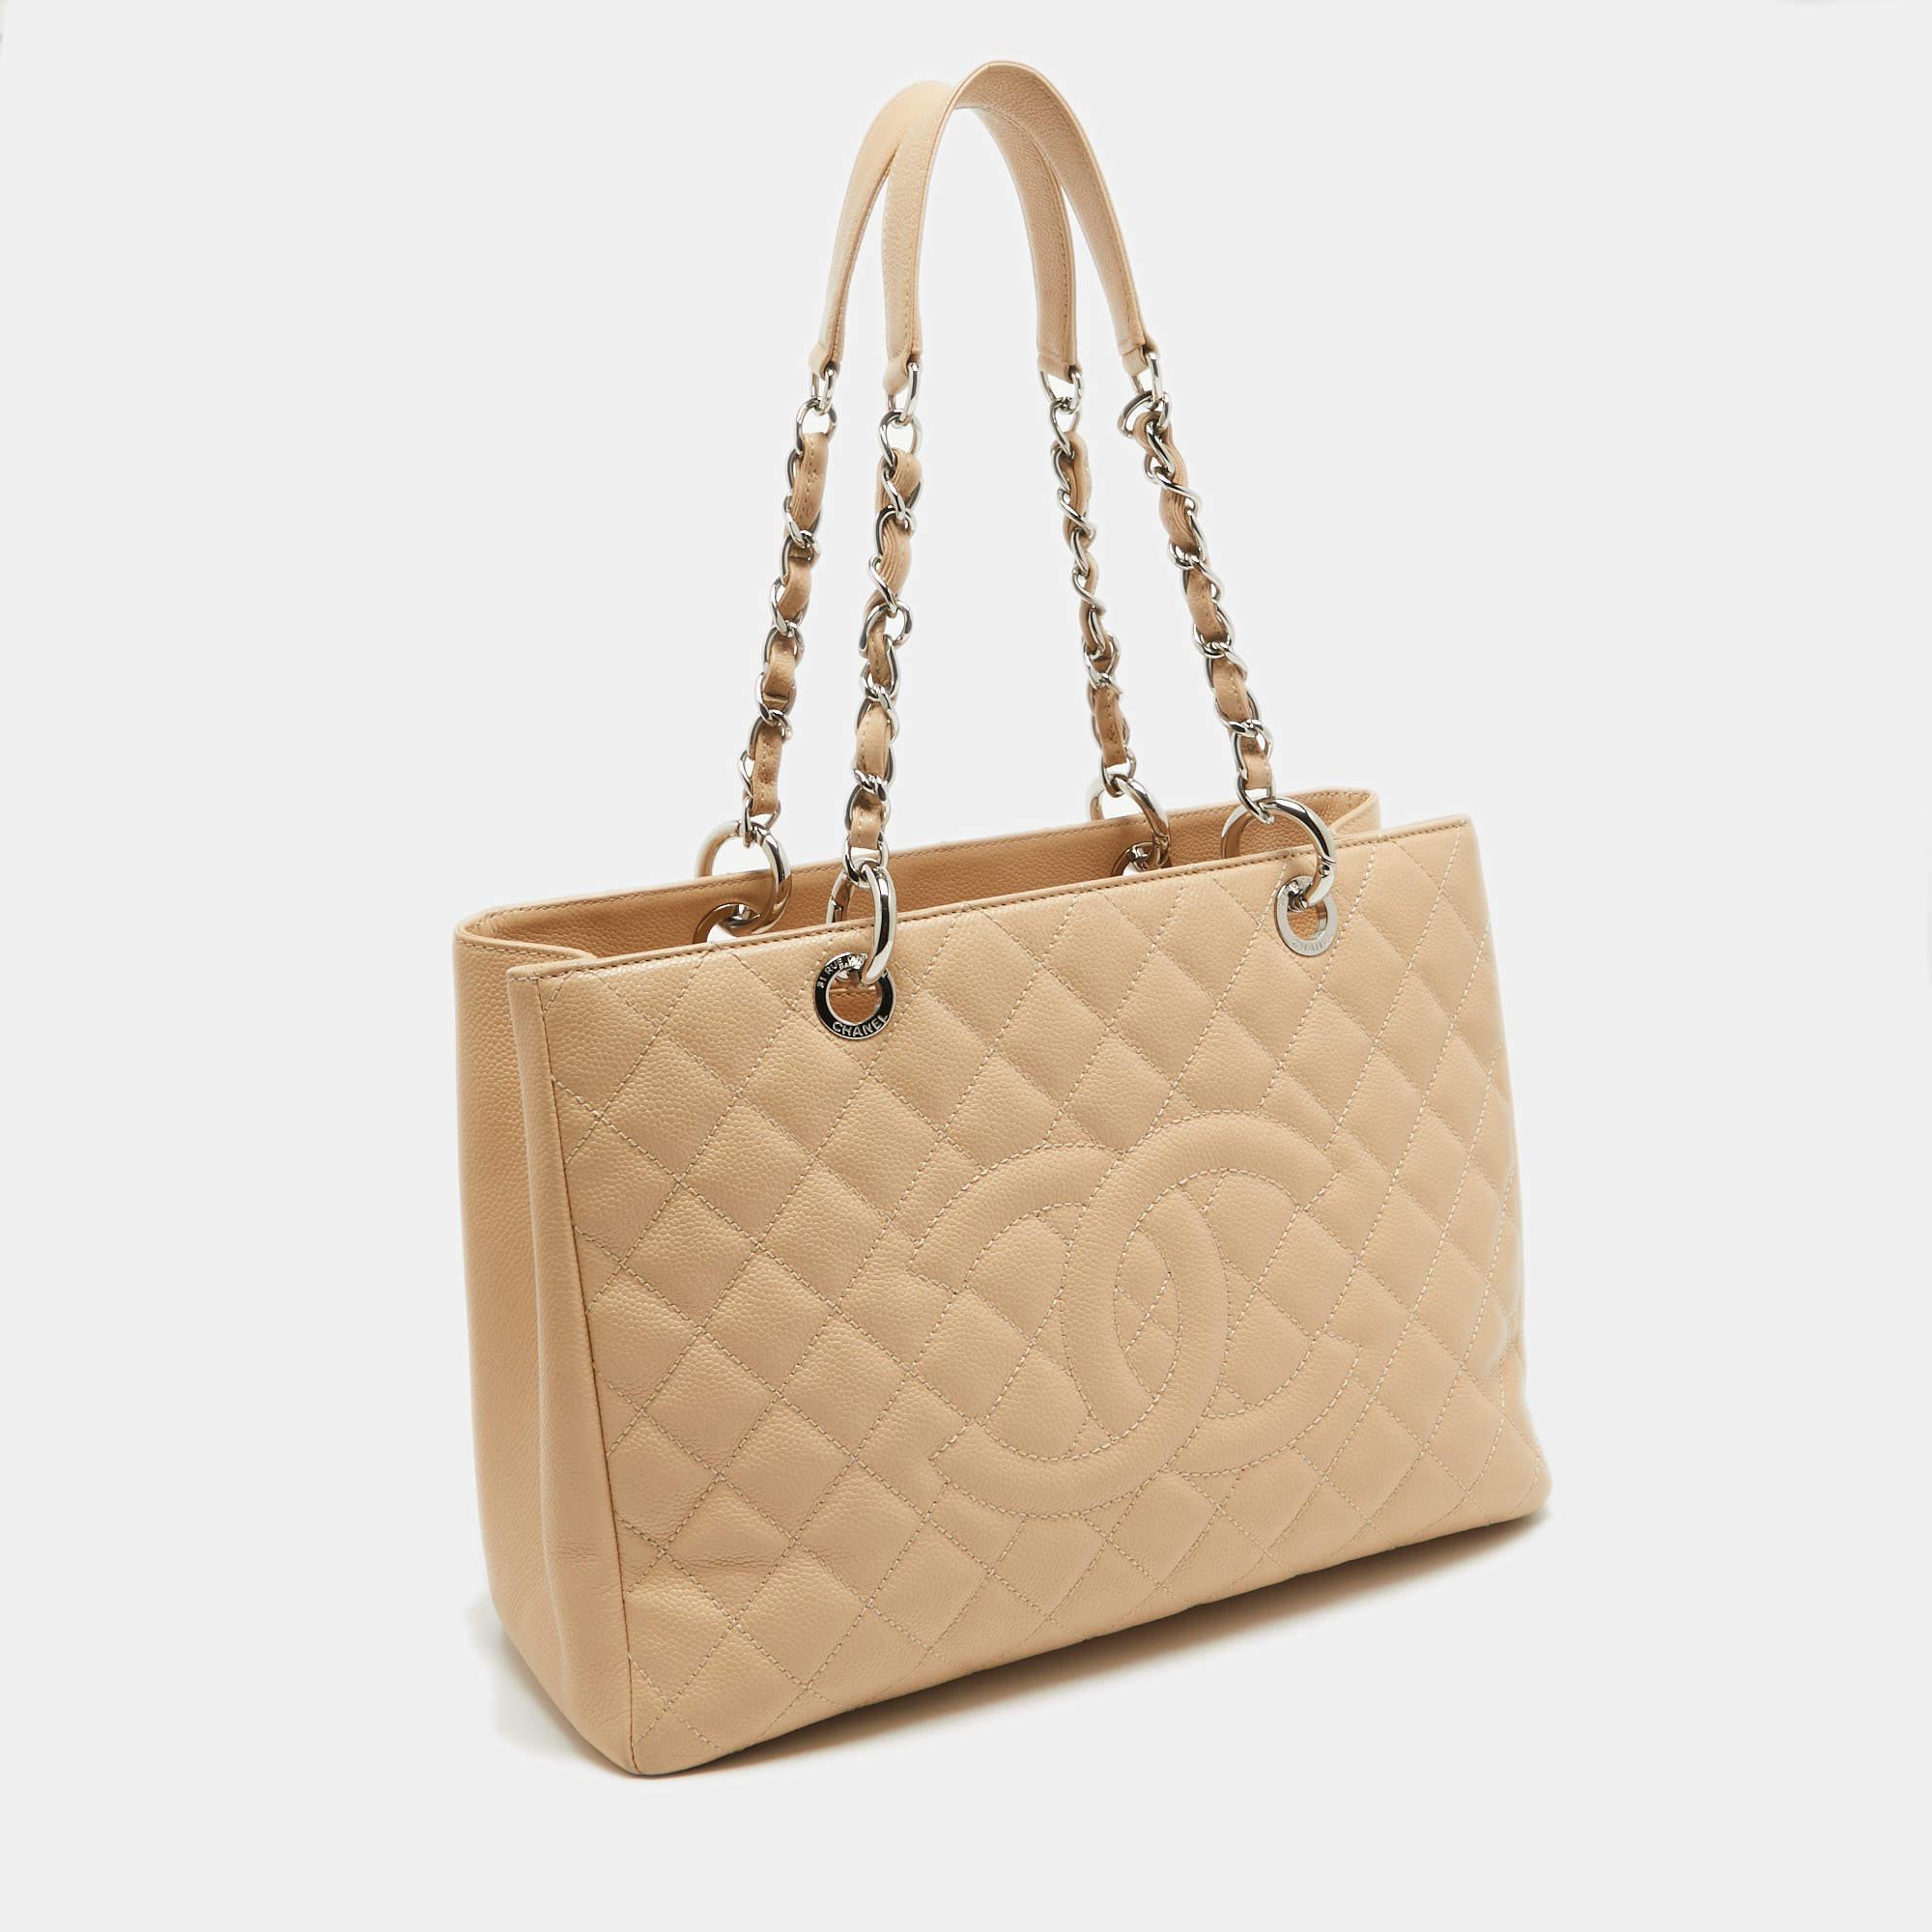 Chanel Beige Quilted Caviar Leather GST Shopper Tote 11